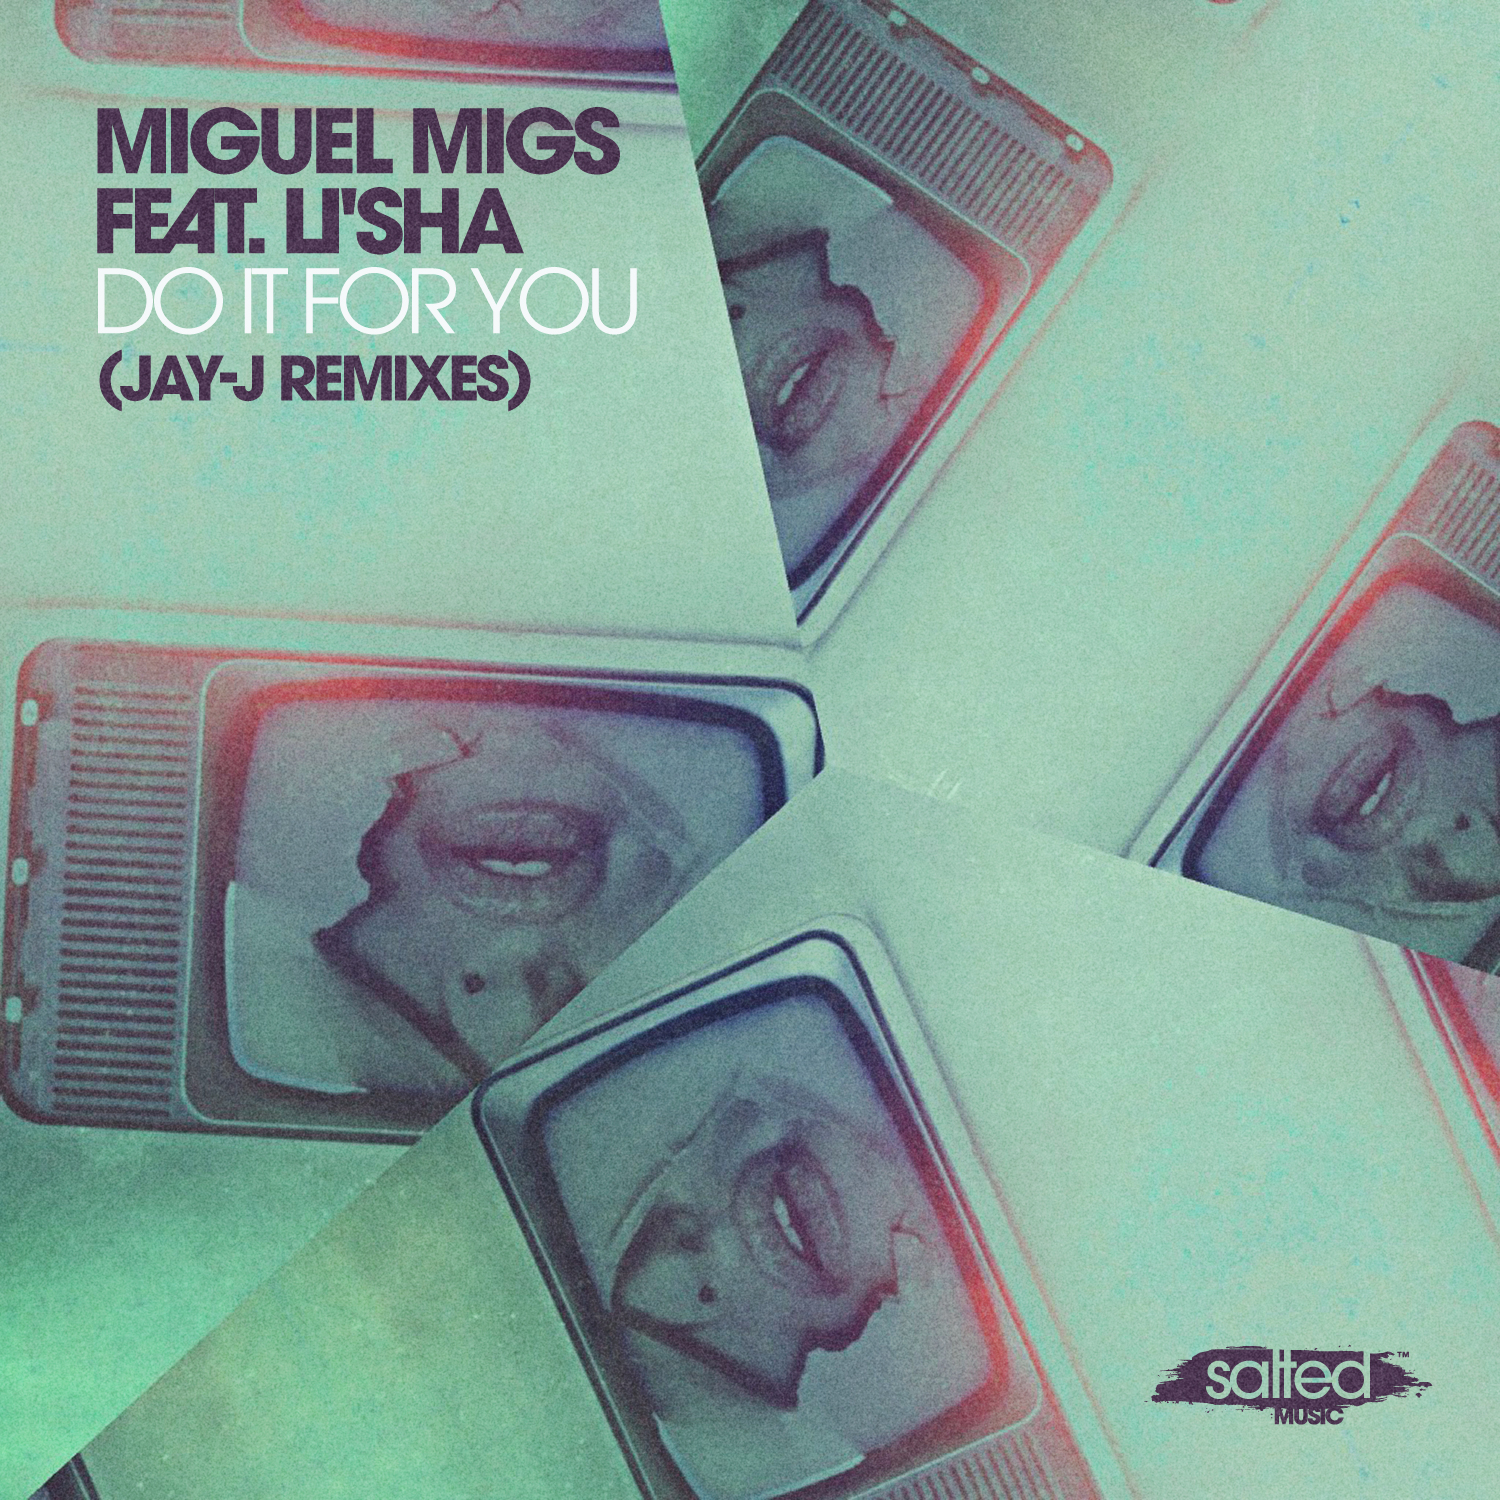 SLT151: Do It for You (Jay-J Remixes) Miguel Migs Feat. Li'sha (Salted Music)